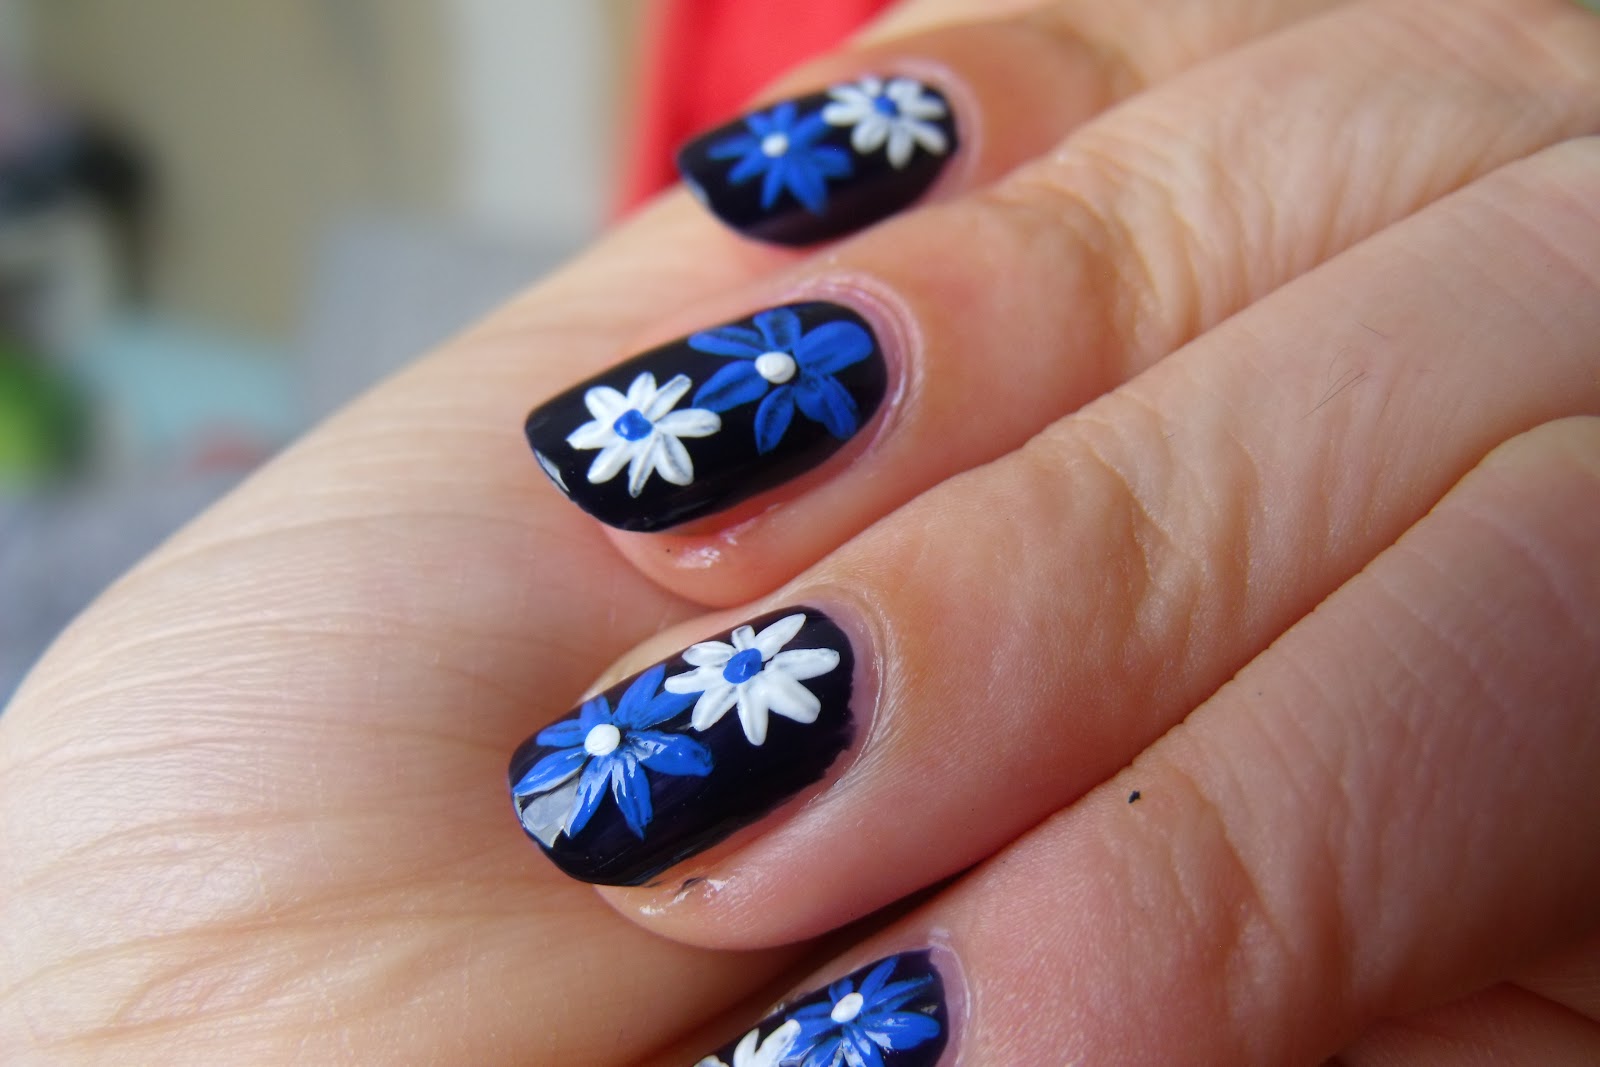 3. 15 Cute and Creative Nail Art Ideas with Dots - wide 3